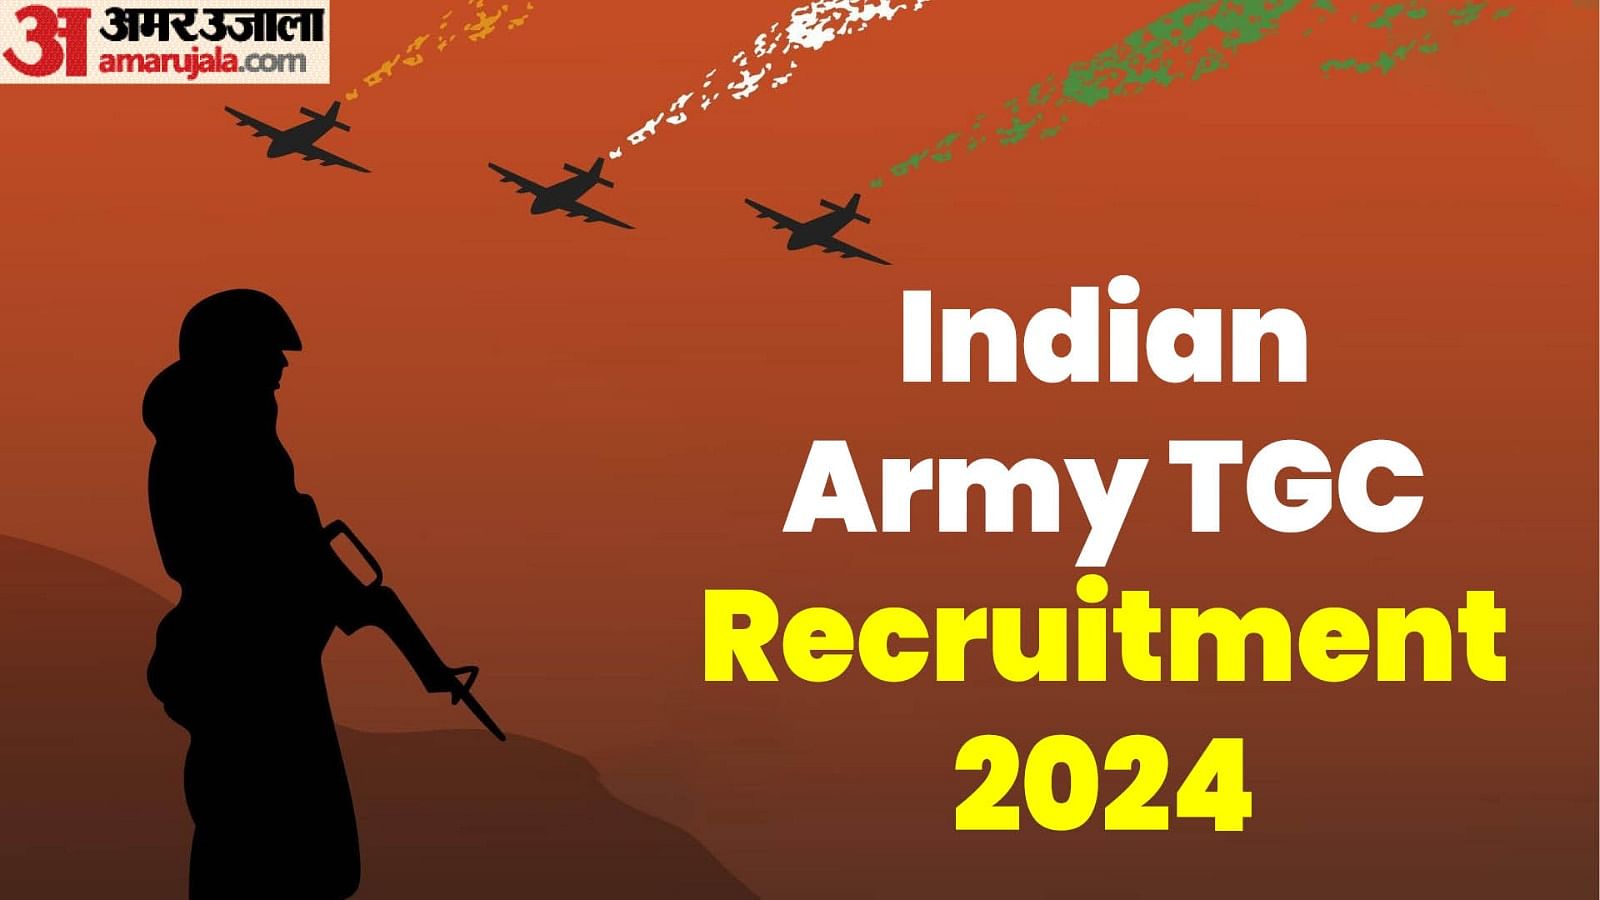 Indian Army TGC 2024 direct recruitment for engineering graduates, Apply now at joinindianarmy.nic.in